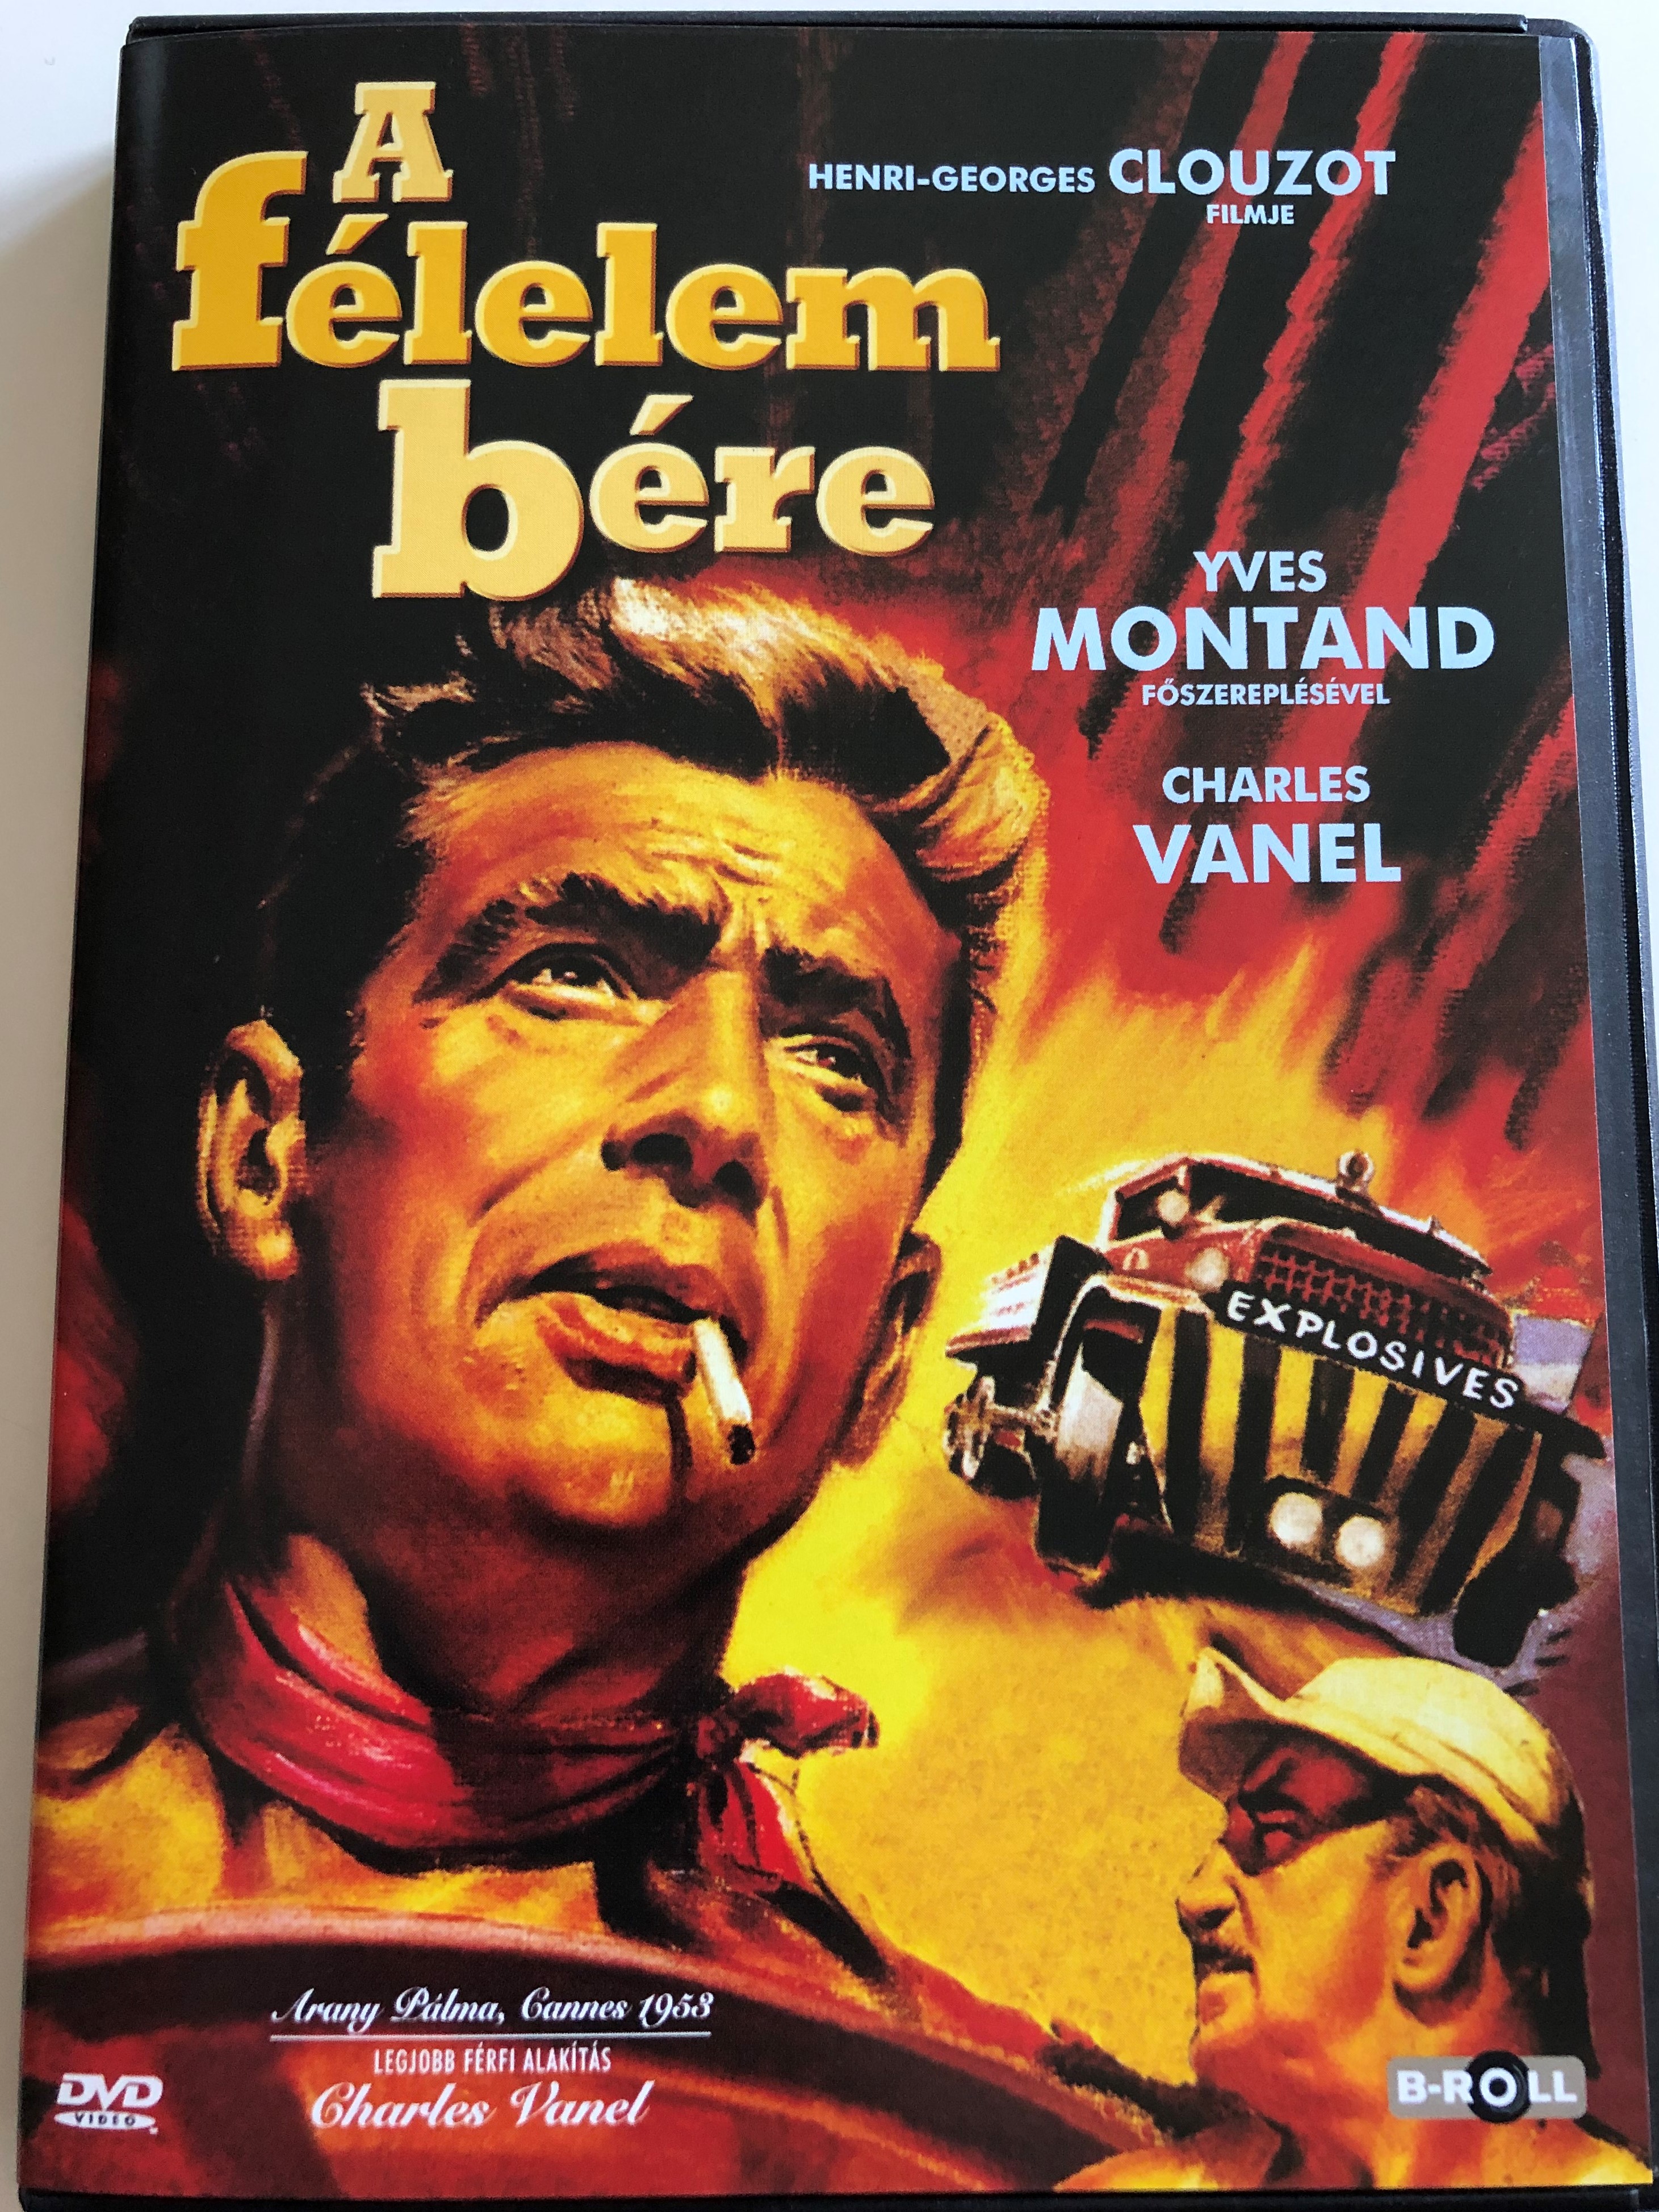 le-salaire-de-la-peur-the-wages-of-fear-dvd-1953-a-f-lelem-v-re-directed-by-henri-georges-clouzot-starring-yves-montand-charles-vanel-folco-lulli-peter-van-eyck-1-.jpg